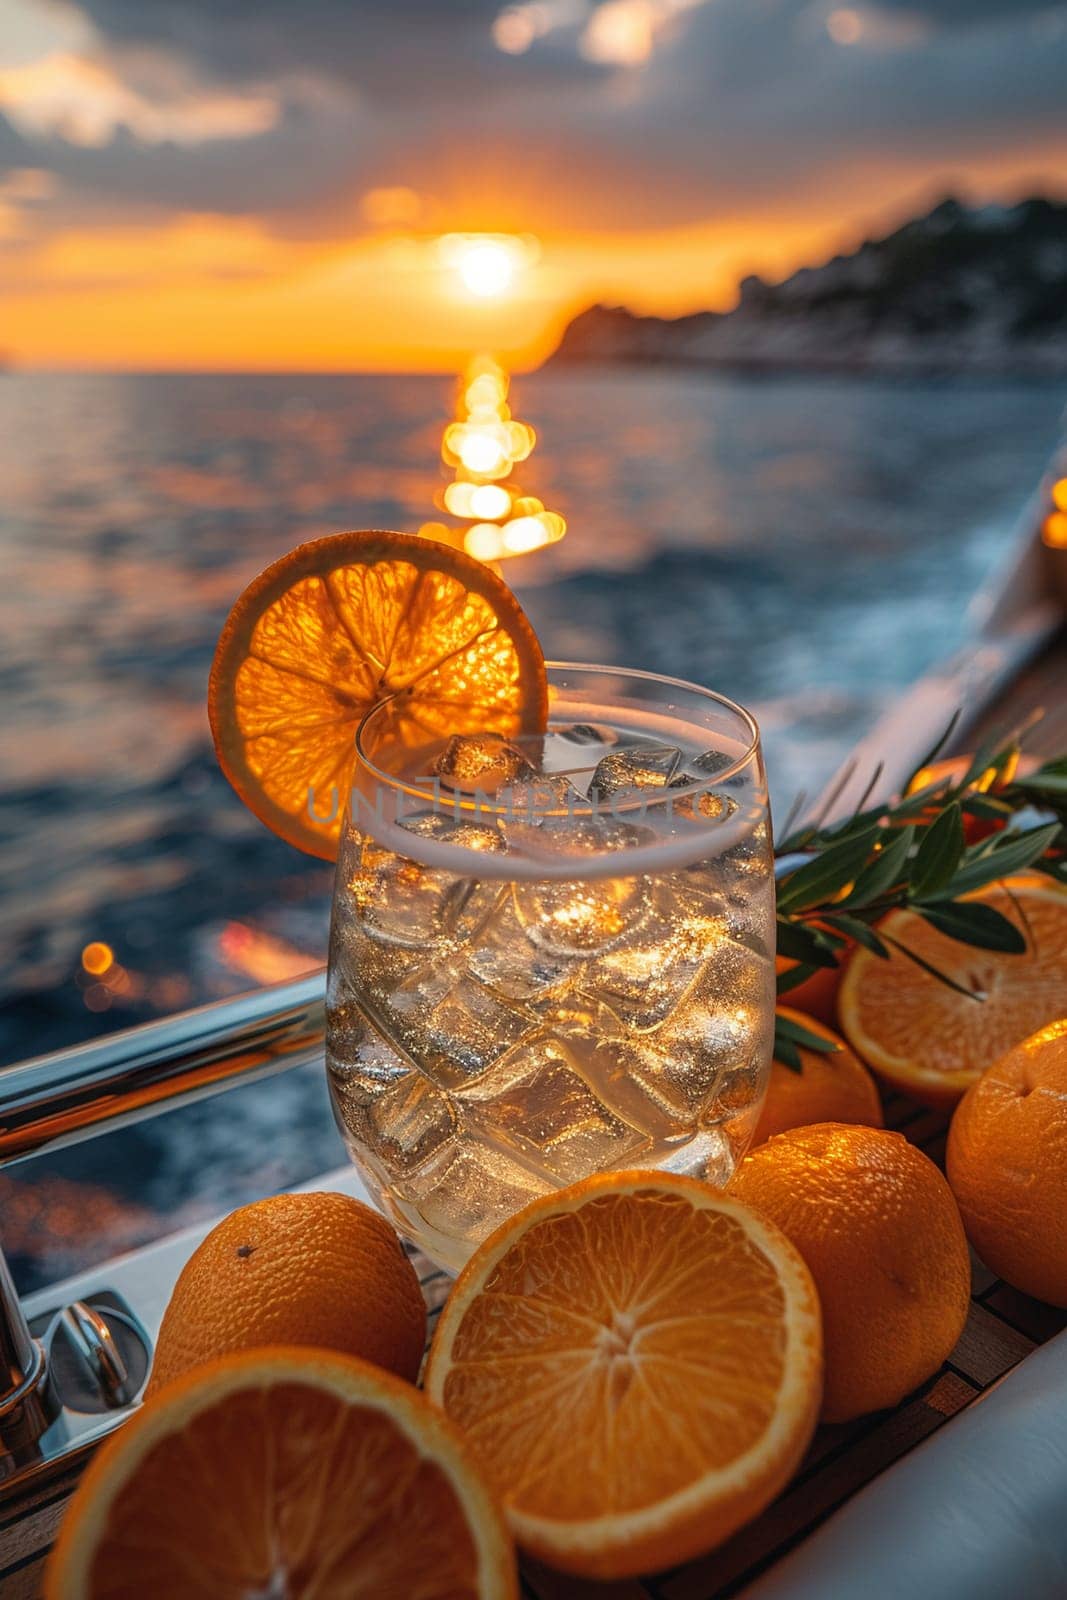 Sea Breeze on a yacht cruising the Mediterranean, the salty air complementing the drink's freshness.